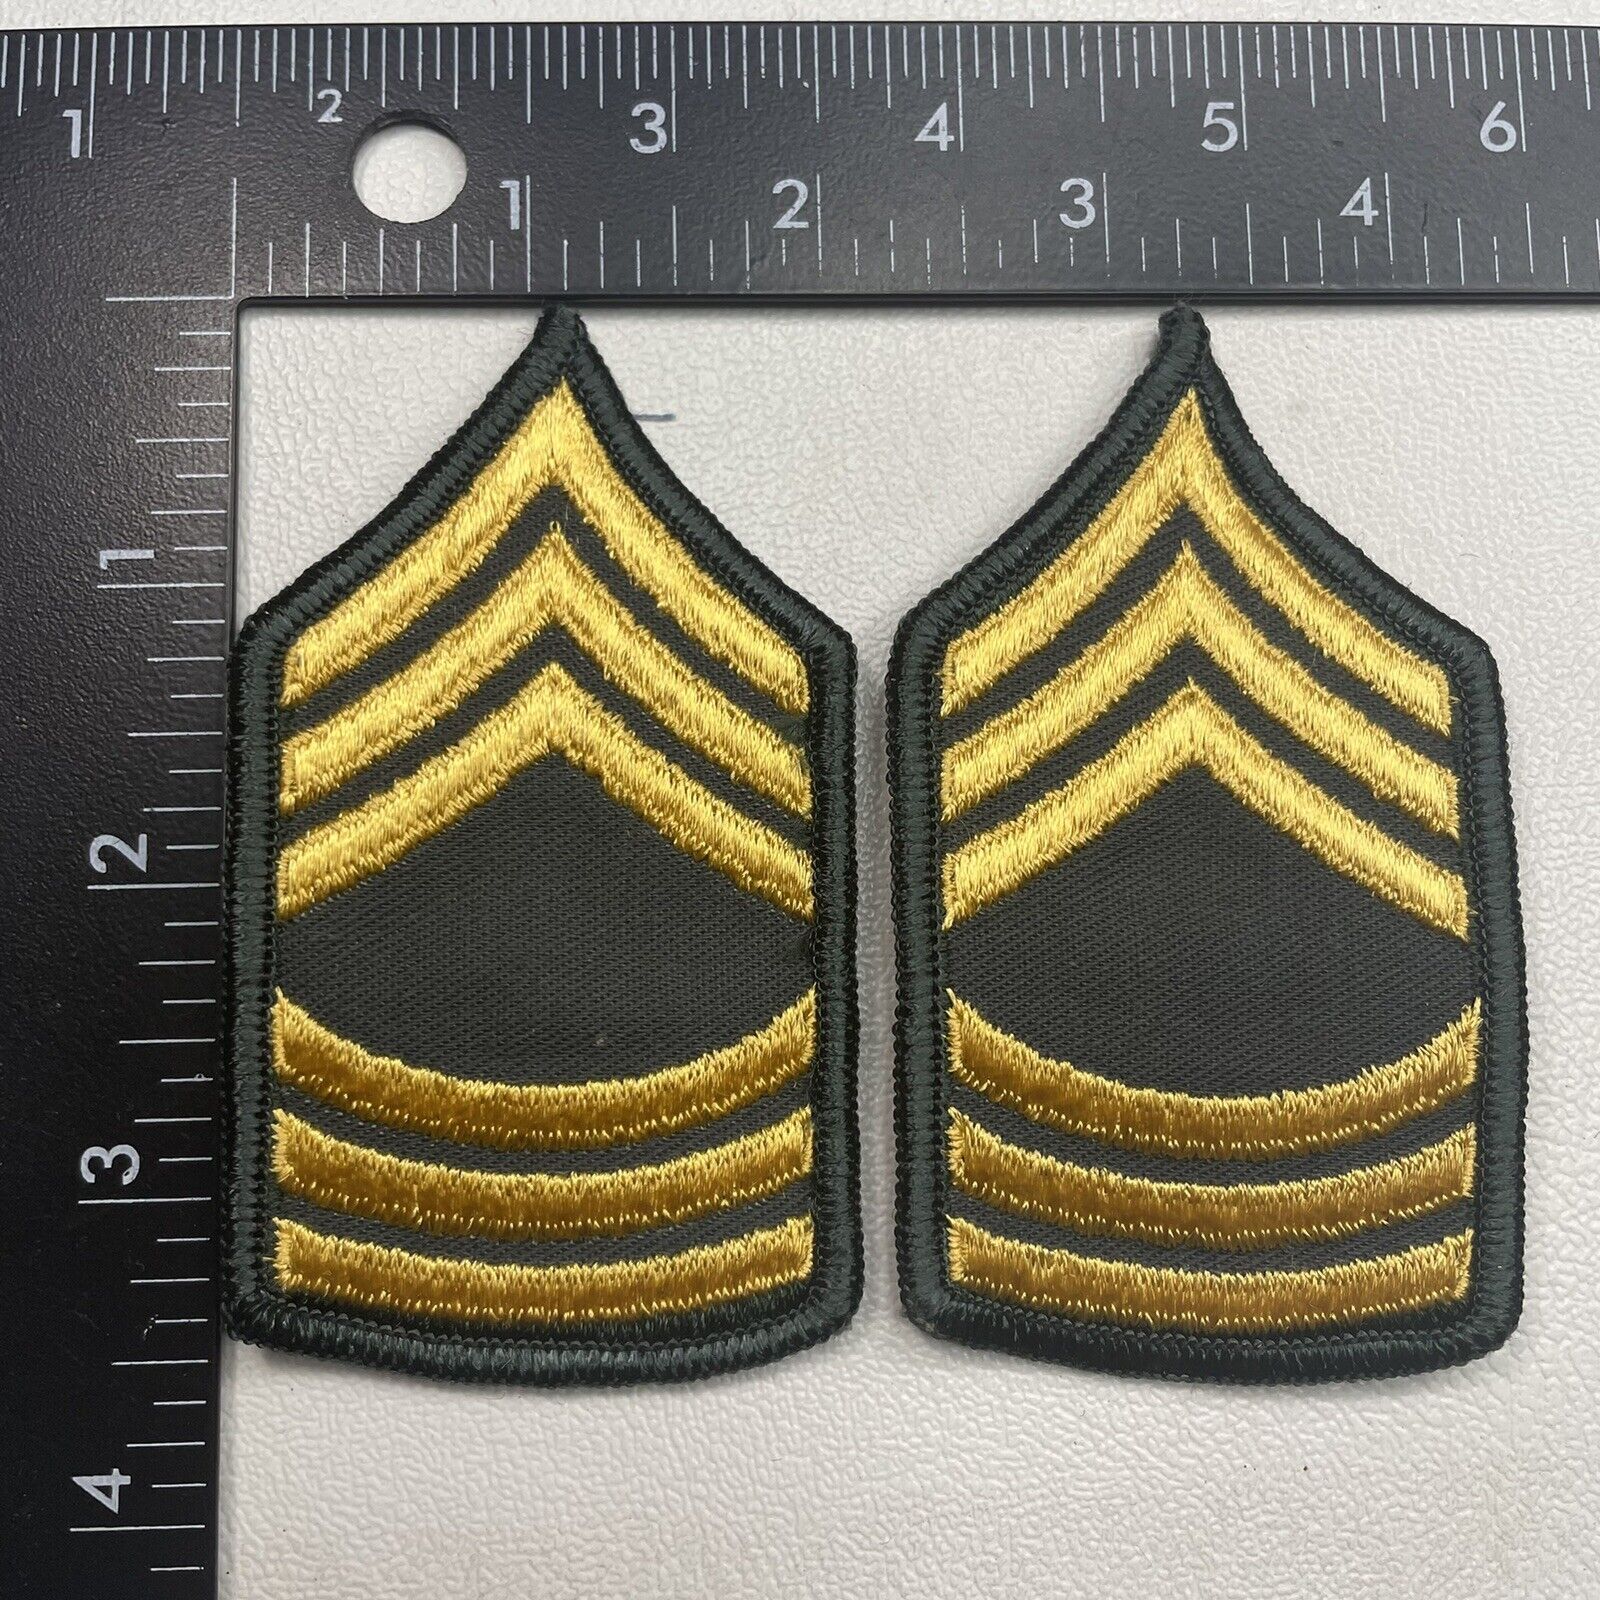 Small Size Army MASTER SERGEANT Rank Insignia Patch Lot Of 2 00XO